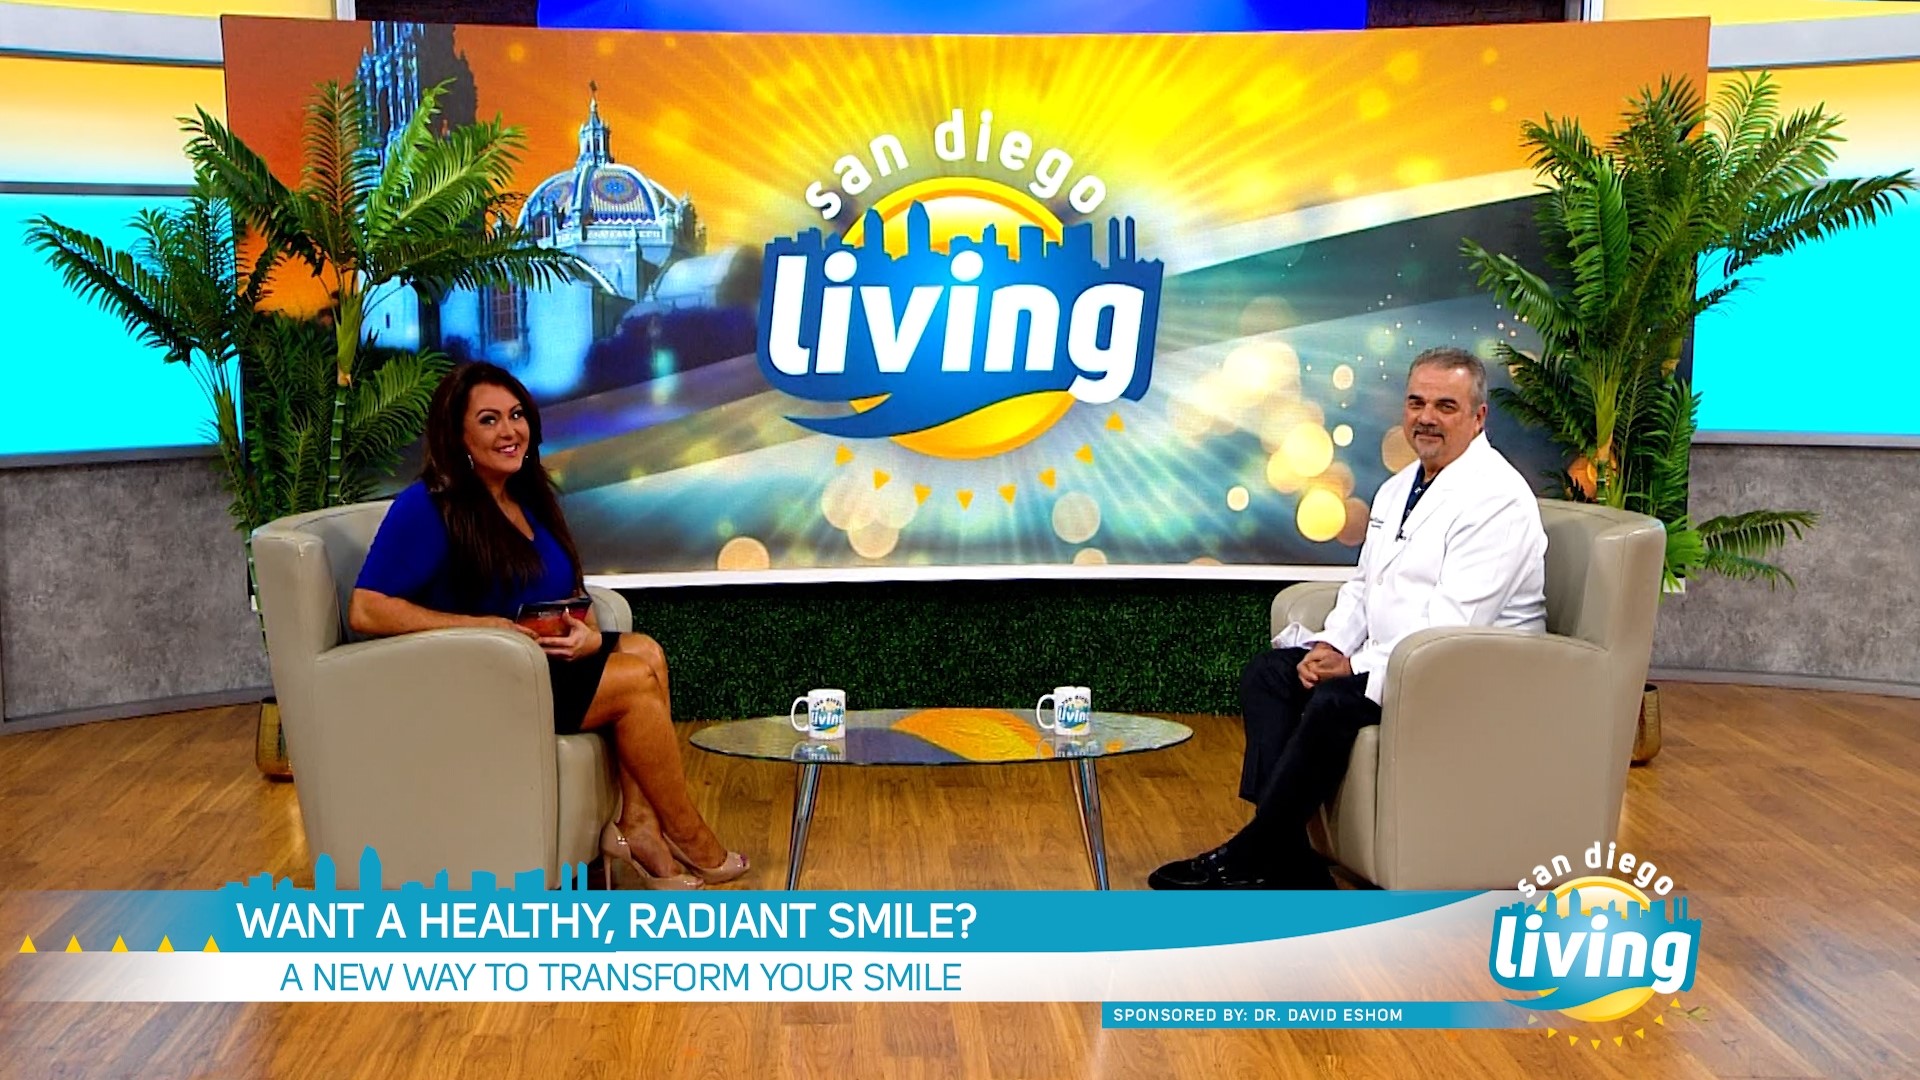 Dr. David Eshom has been transforming patients’ smiles into ones they can be proud of for more than 25 years. Sponsored by: Dr. David Eshom